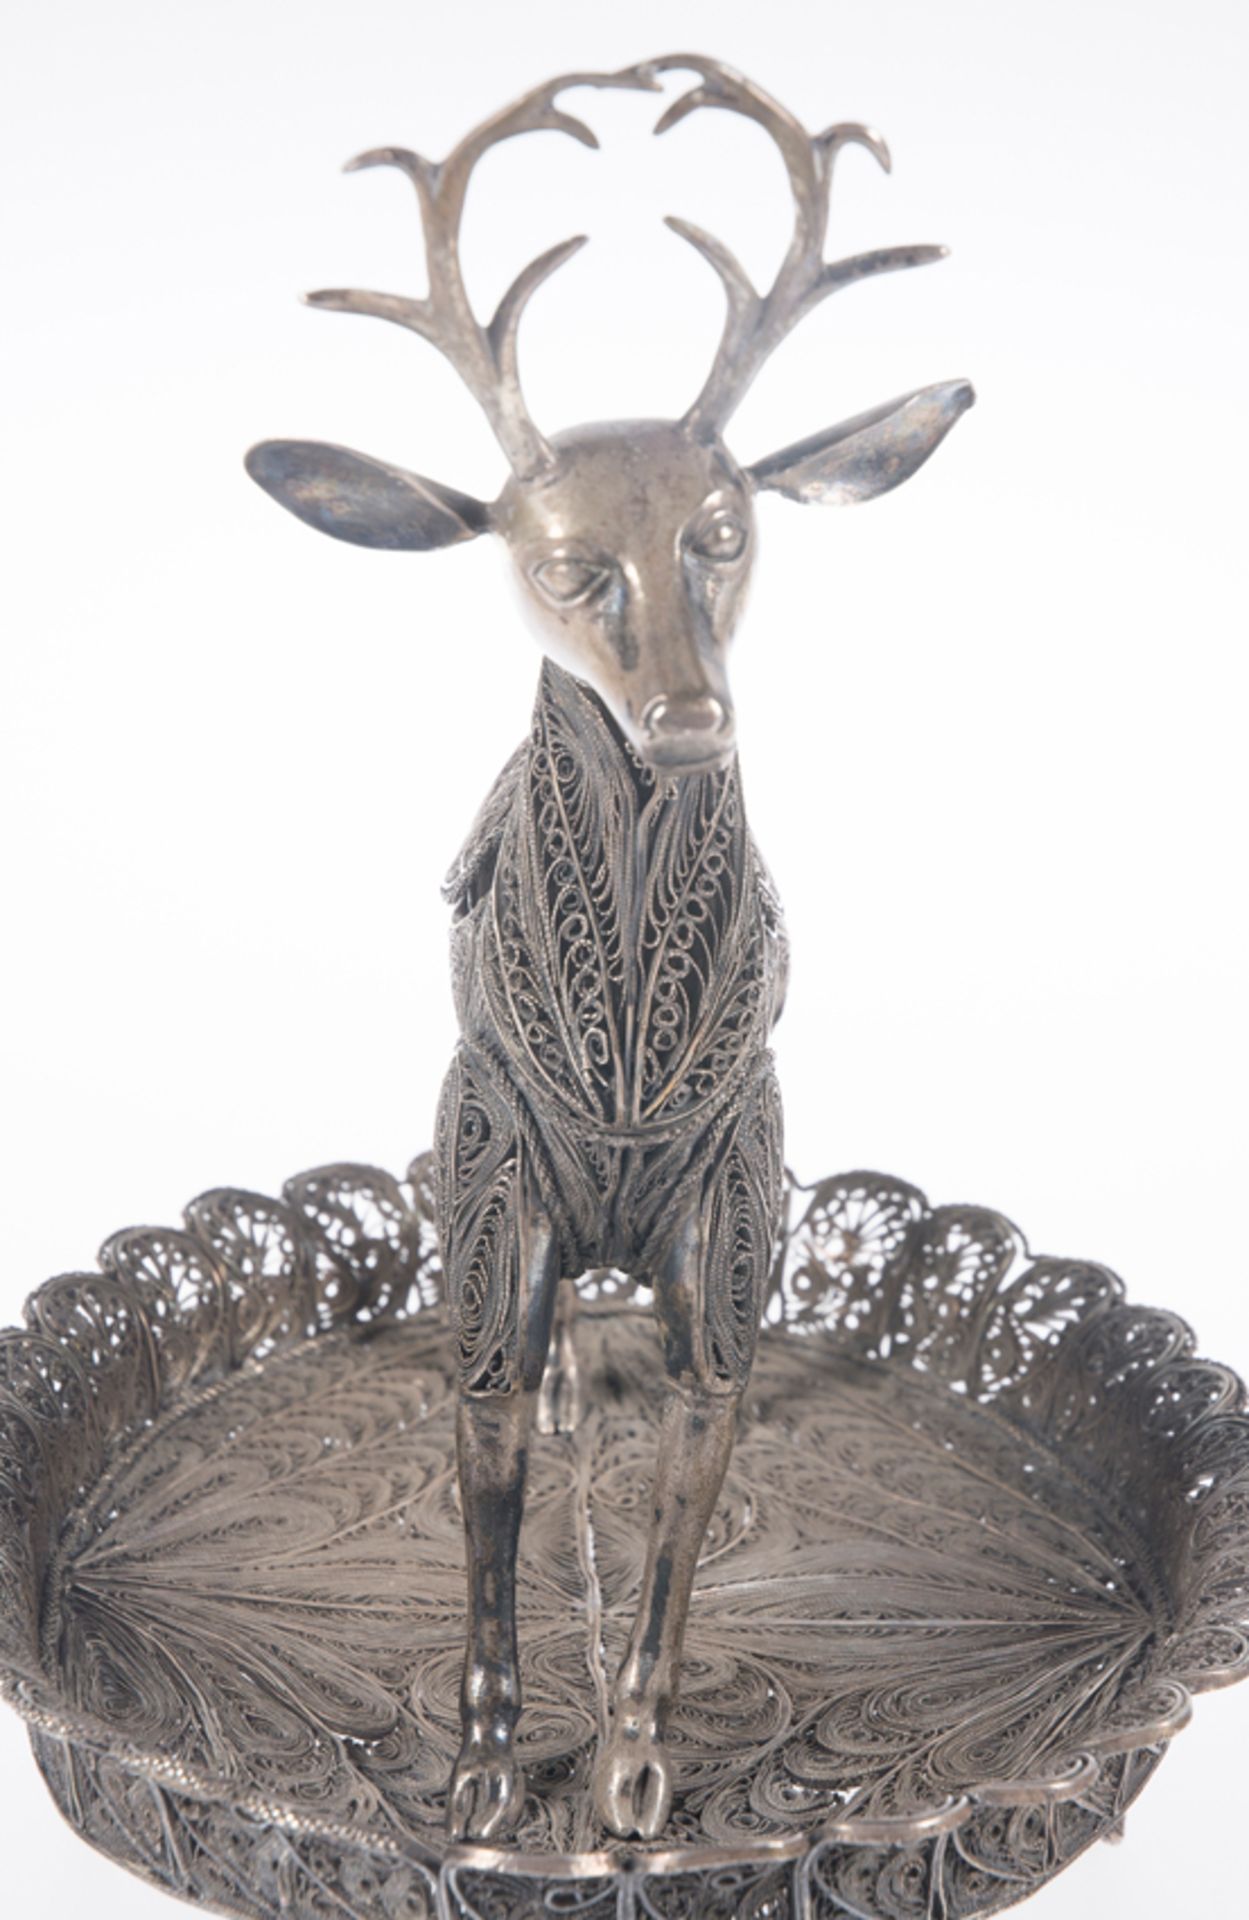 "Sahumador". Deer-shaped, silver filigree incense burner in chased and embossed cast silver. Colonia - Bild 6 aus 10